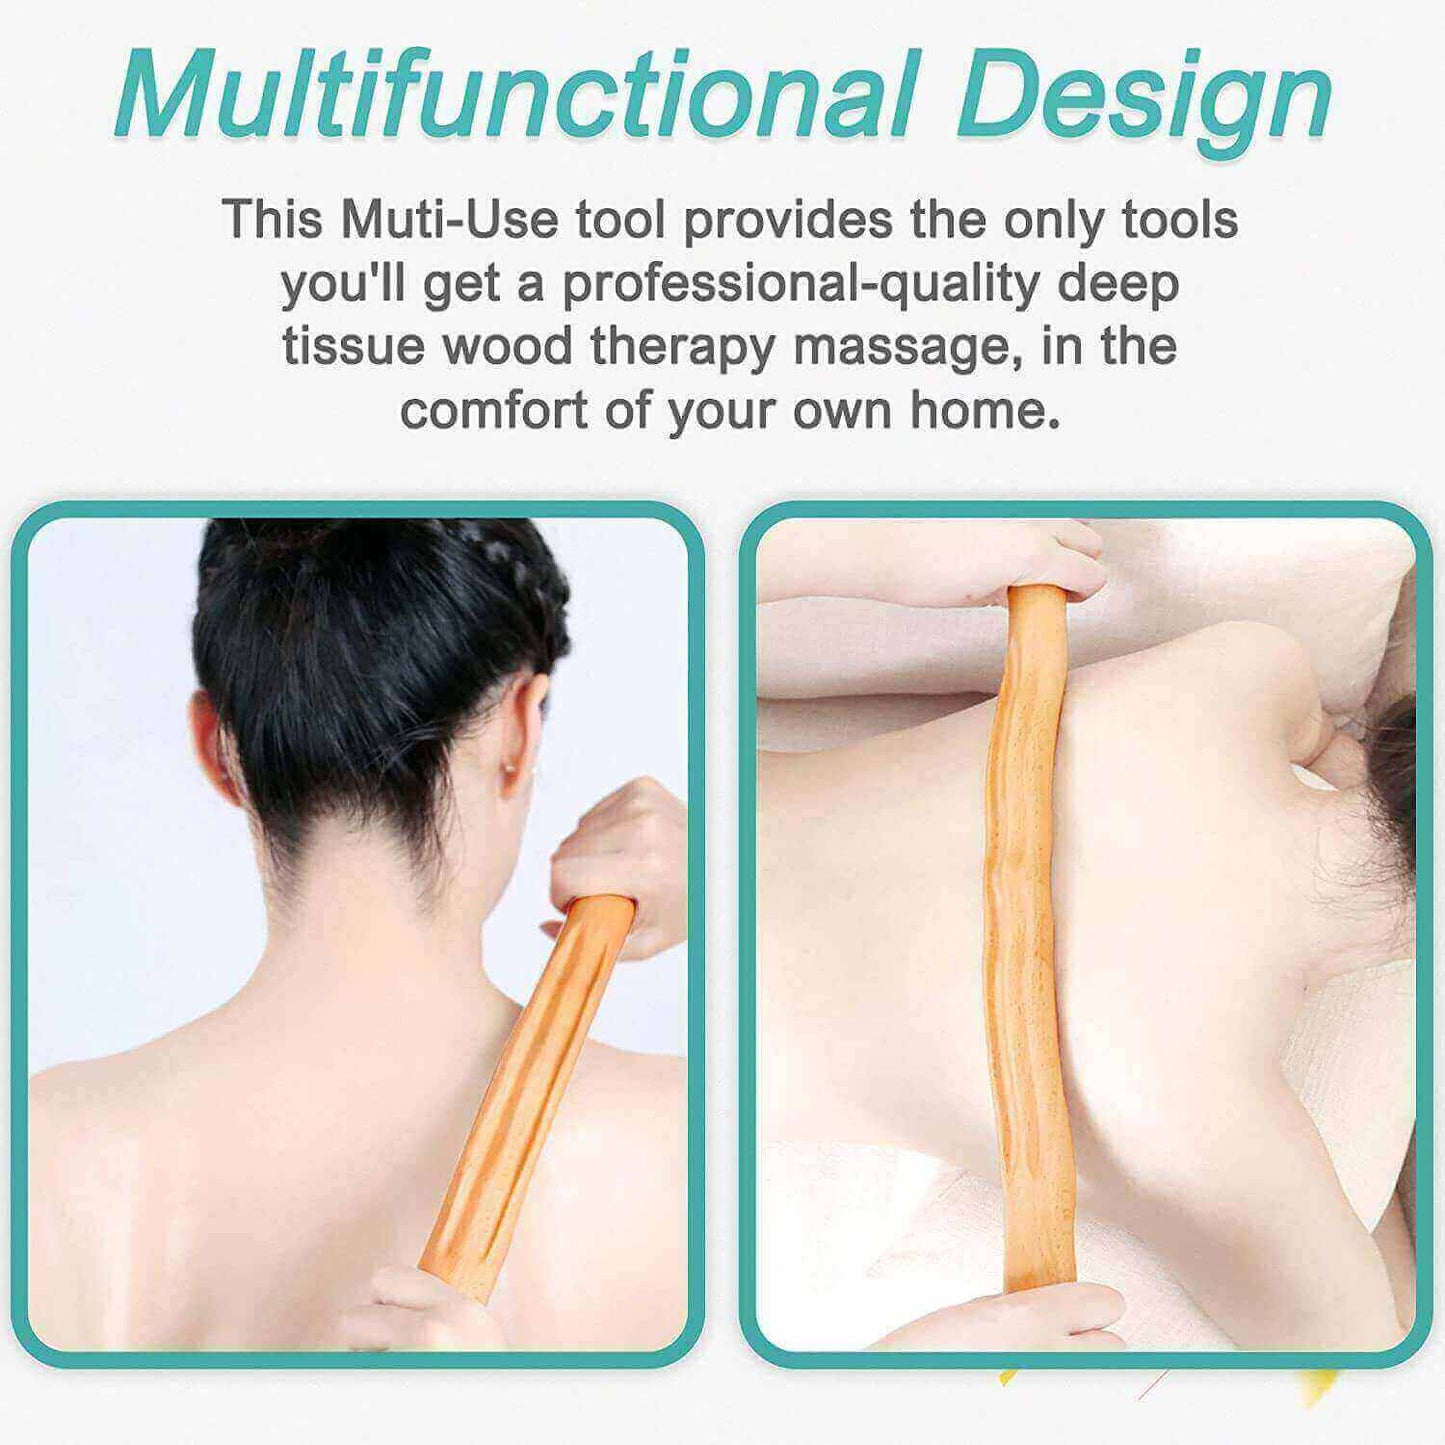 Wooden Gua Sha Massager for Therapy, multifunctional design